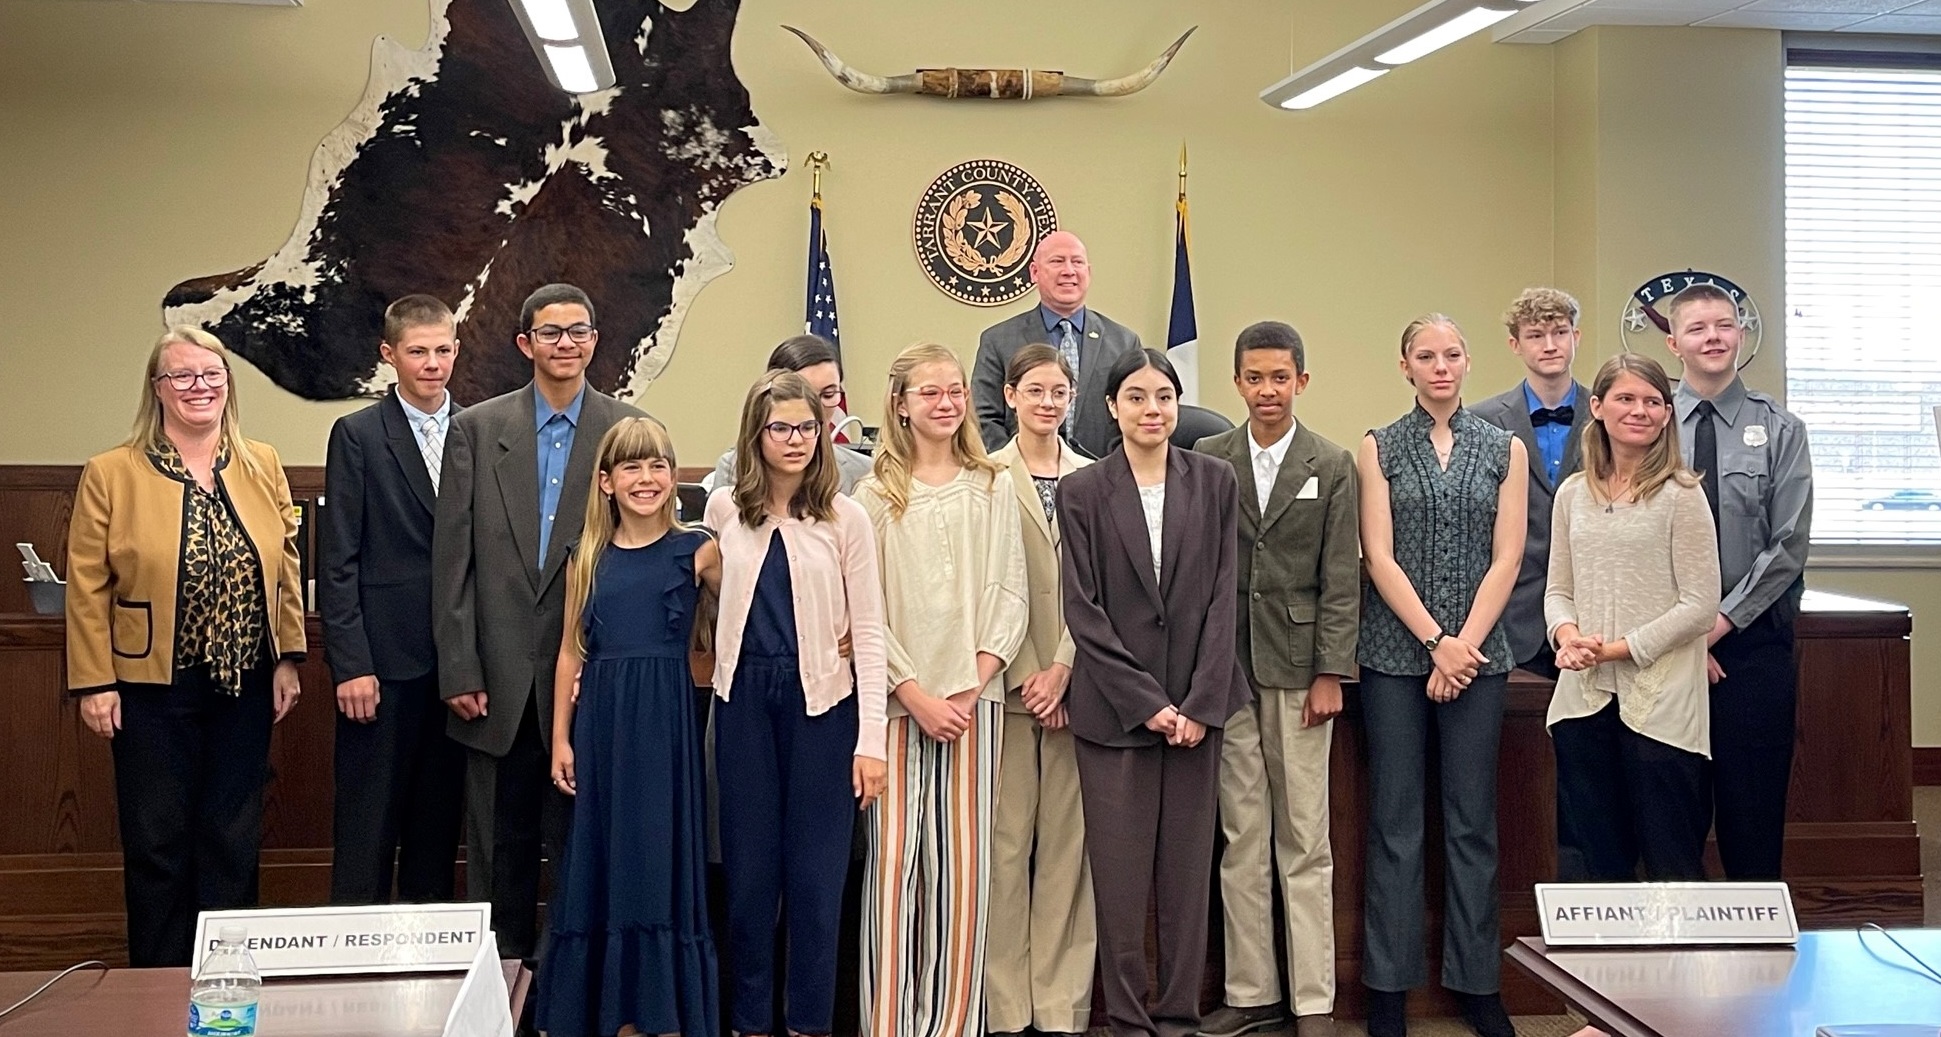 ANOTHER PHOTO PHOTO OF A JUDGE WITH STUDENTS THAT PARTICIPATED IN A MOCK TRIAL